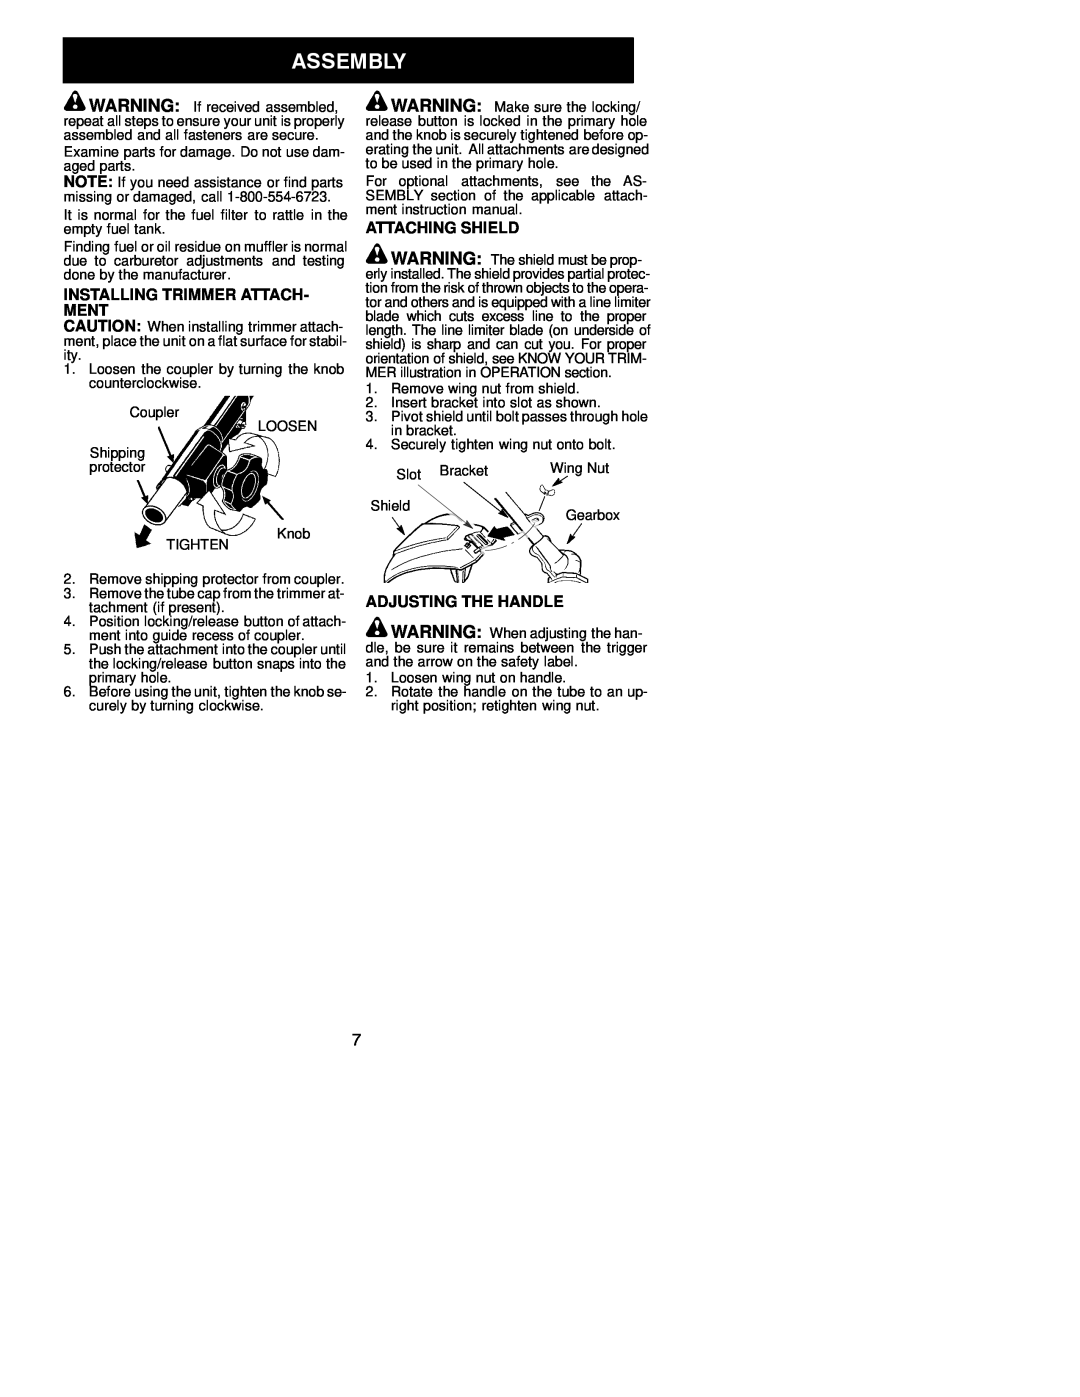 Poulan 530163731 instruction manual Installing Trimmer Attach- Ment, Attaching Shield, Adjusting The Handle 